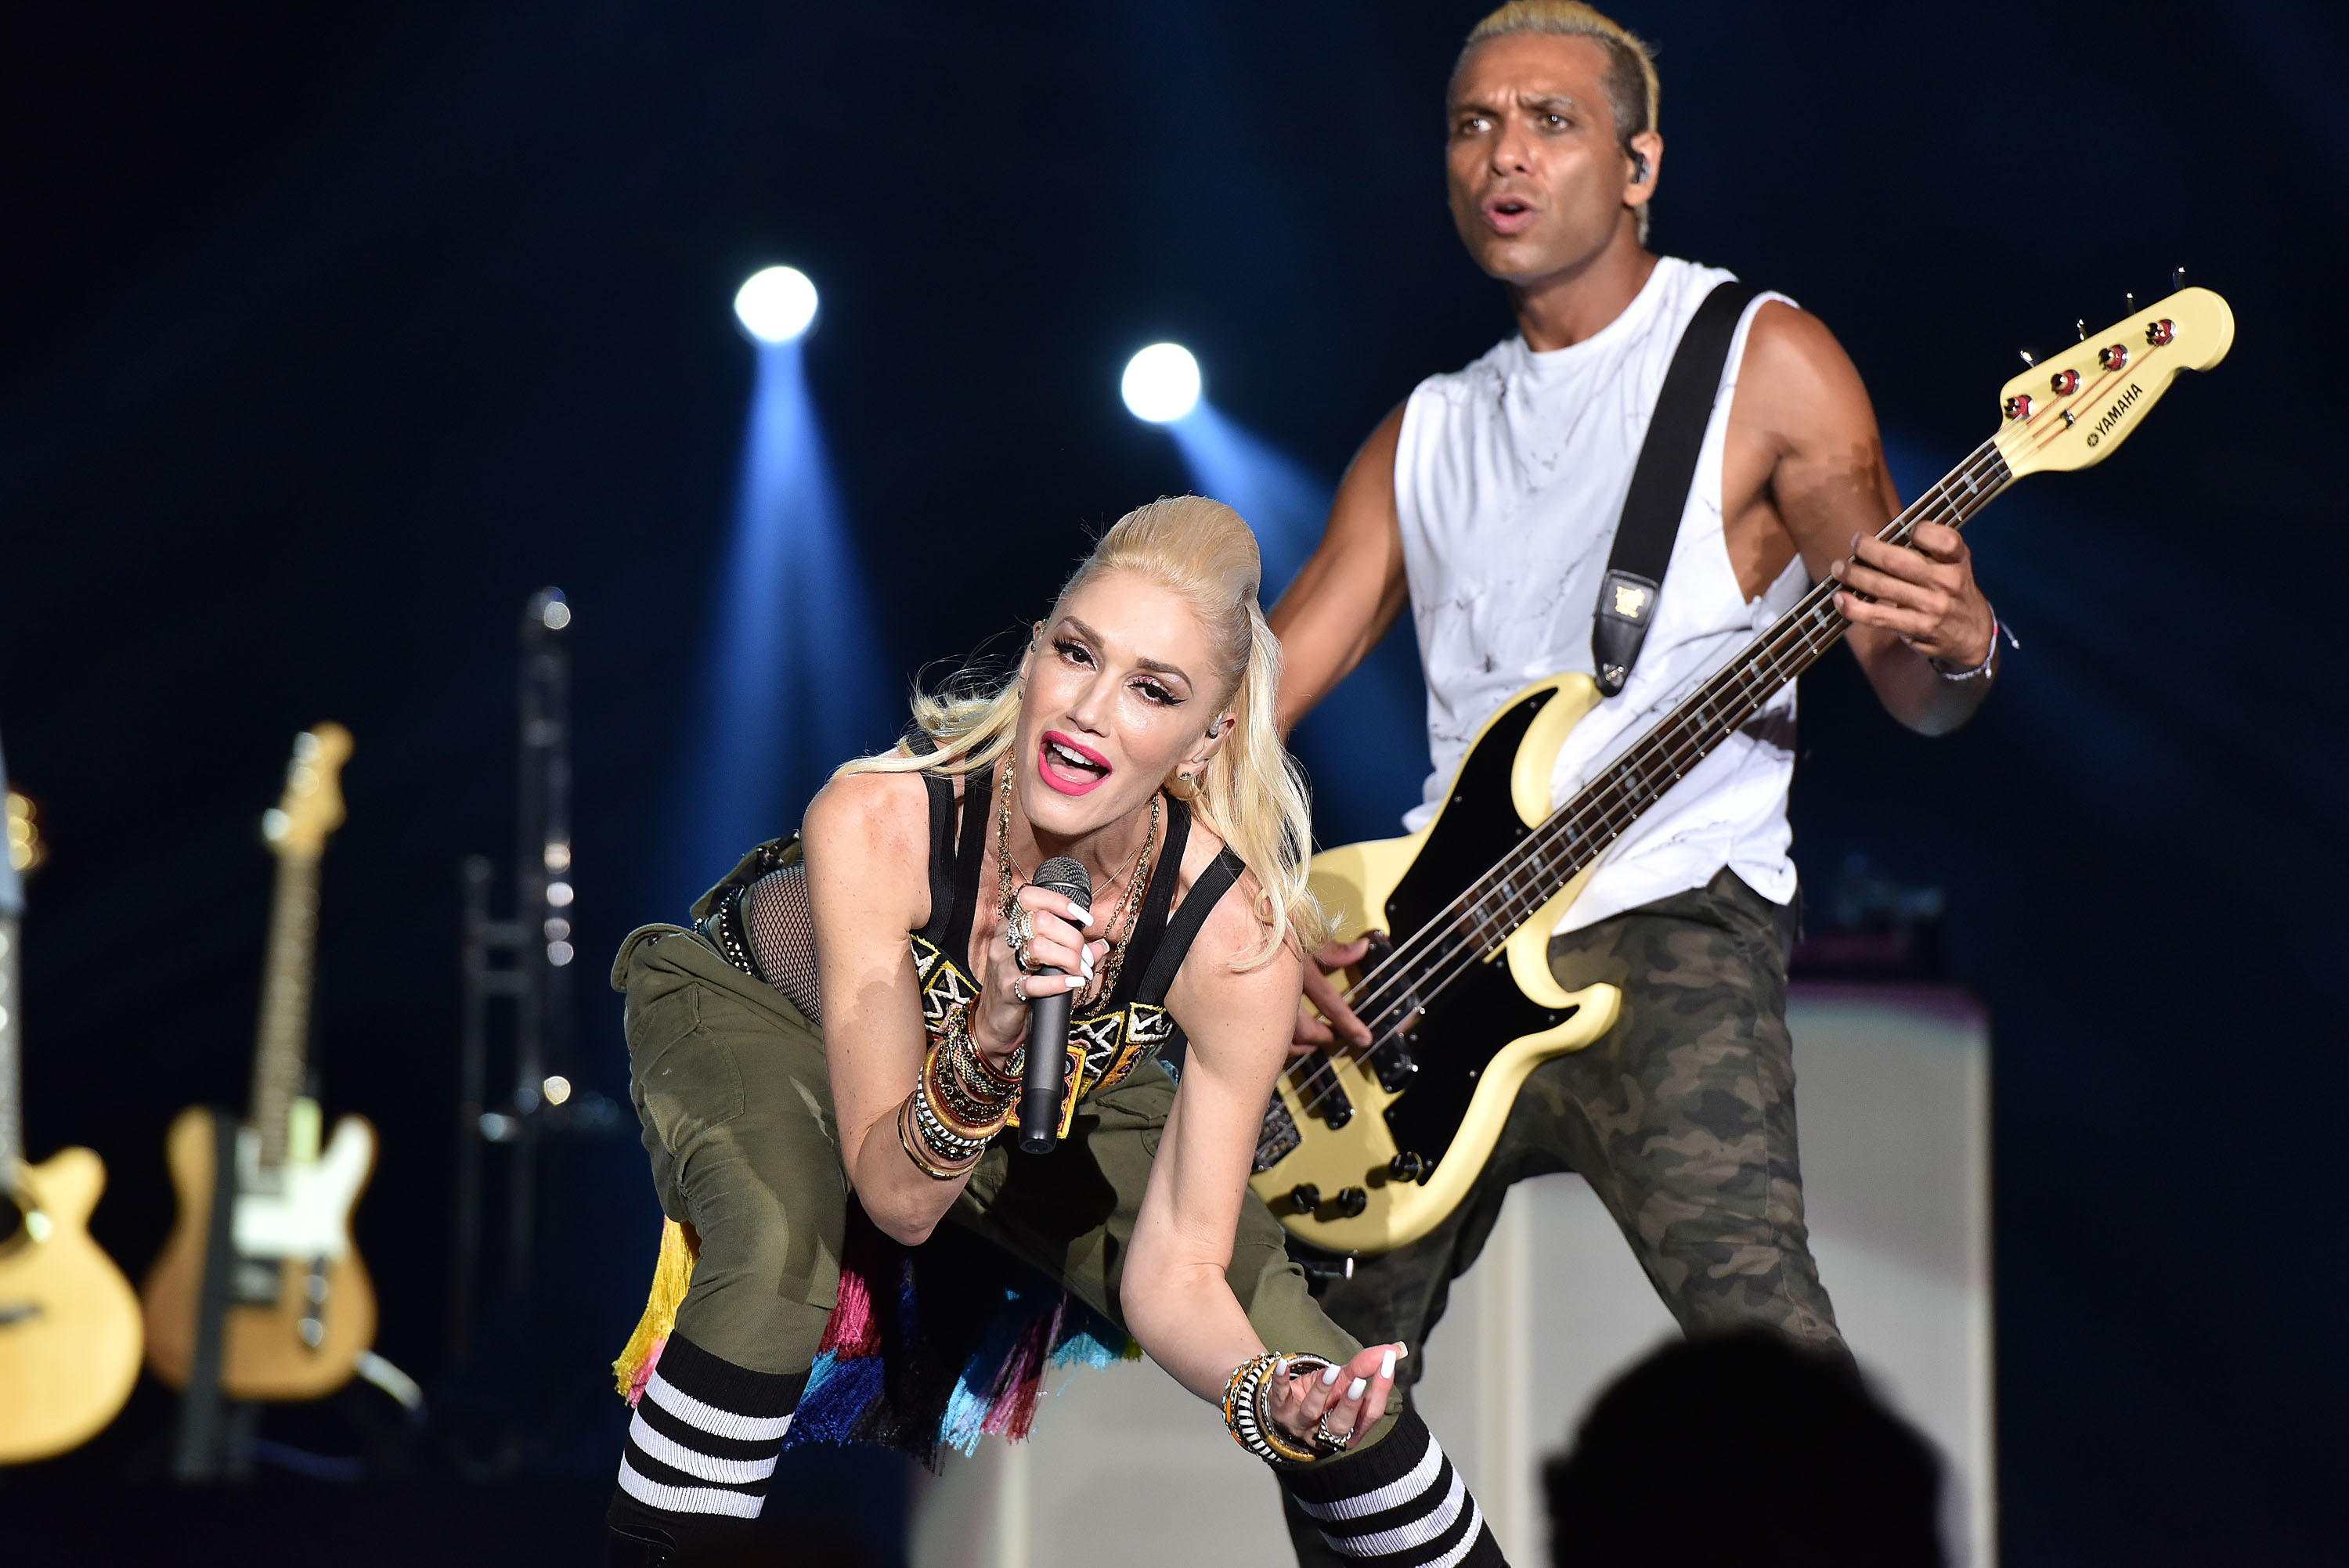 Despite her keenness, a source added that Gwen has no plans to go on a world tour